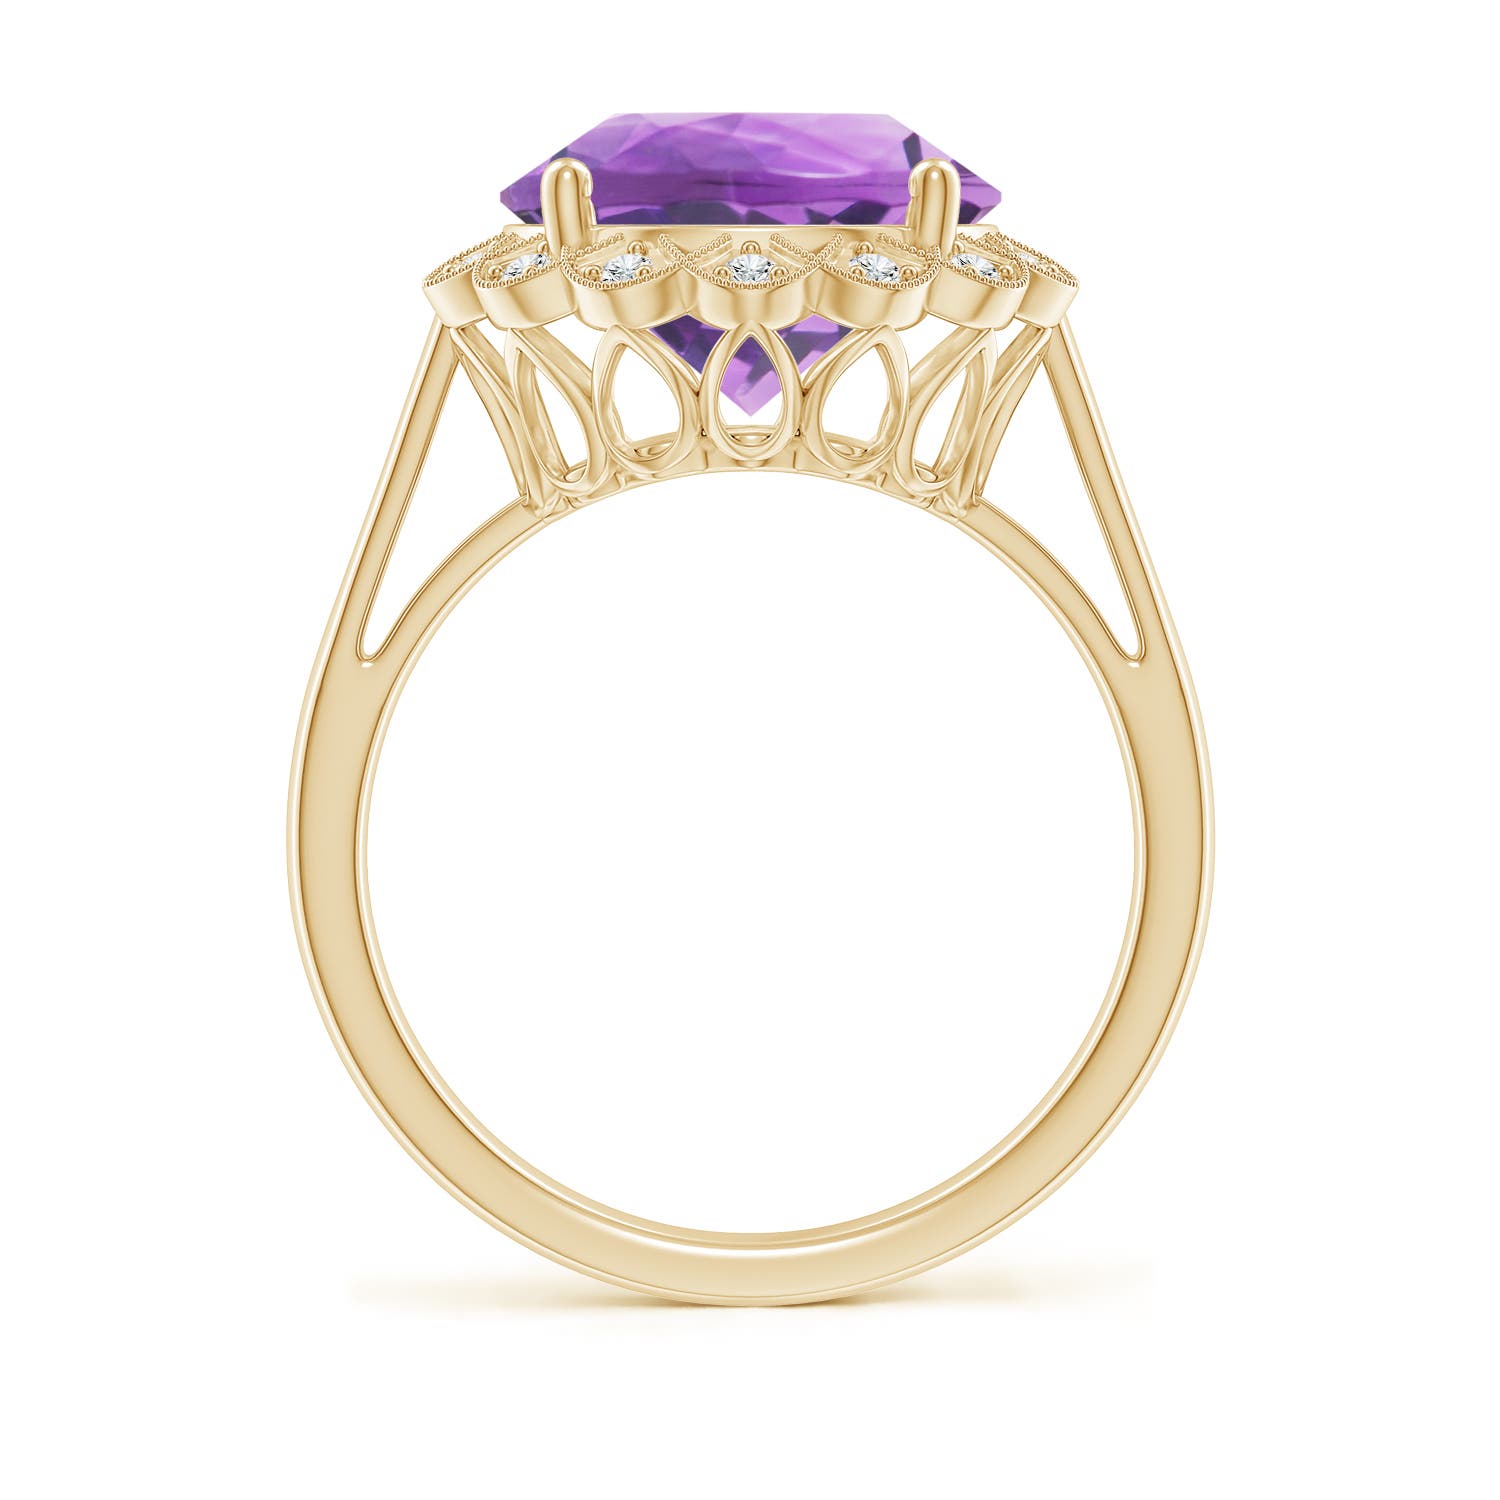 A- Amethyst / 4.86 CT / 14 KT Yellow Gold